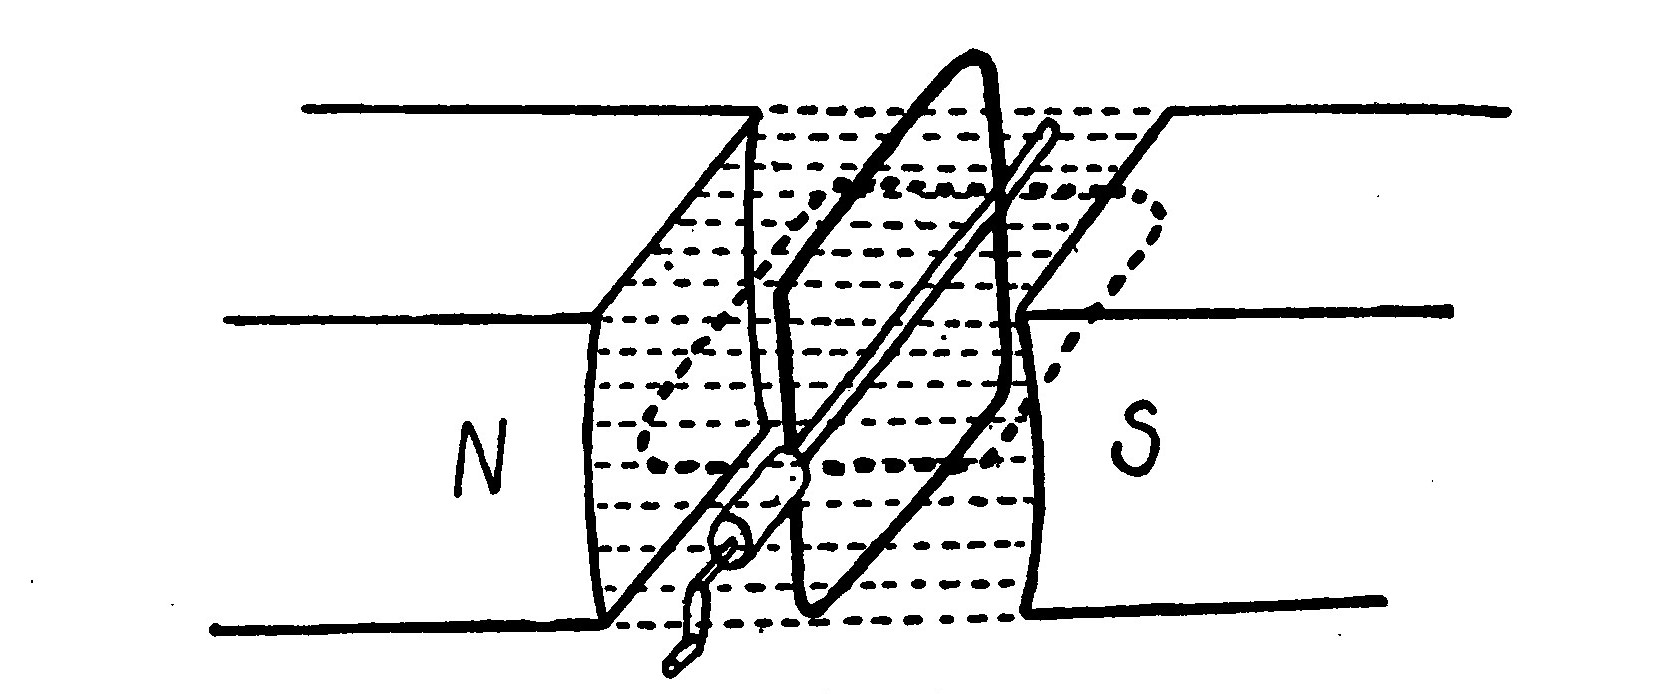 FIG. 16. Diagram showing the principle of the Dynamo.